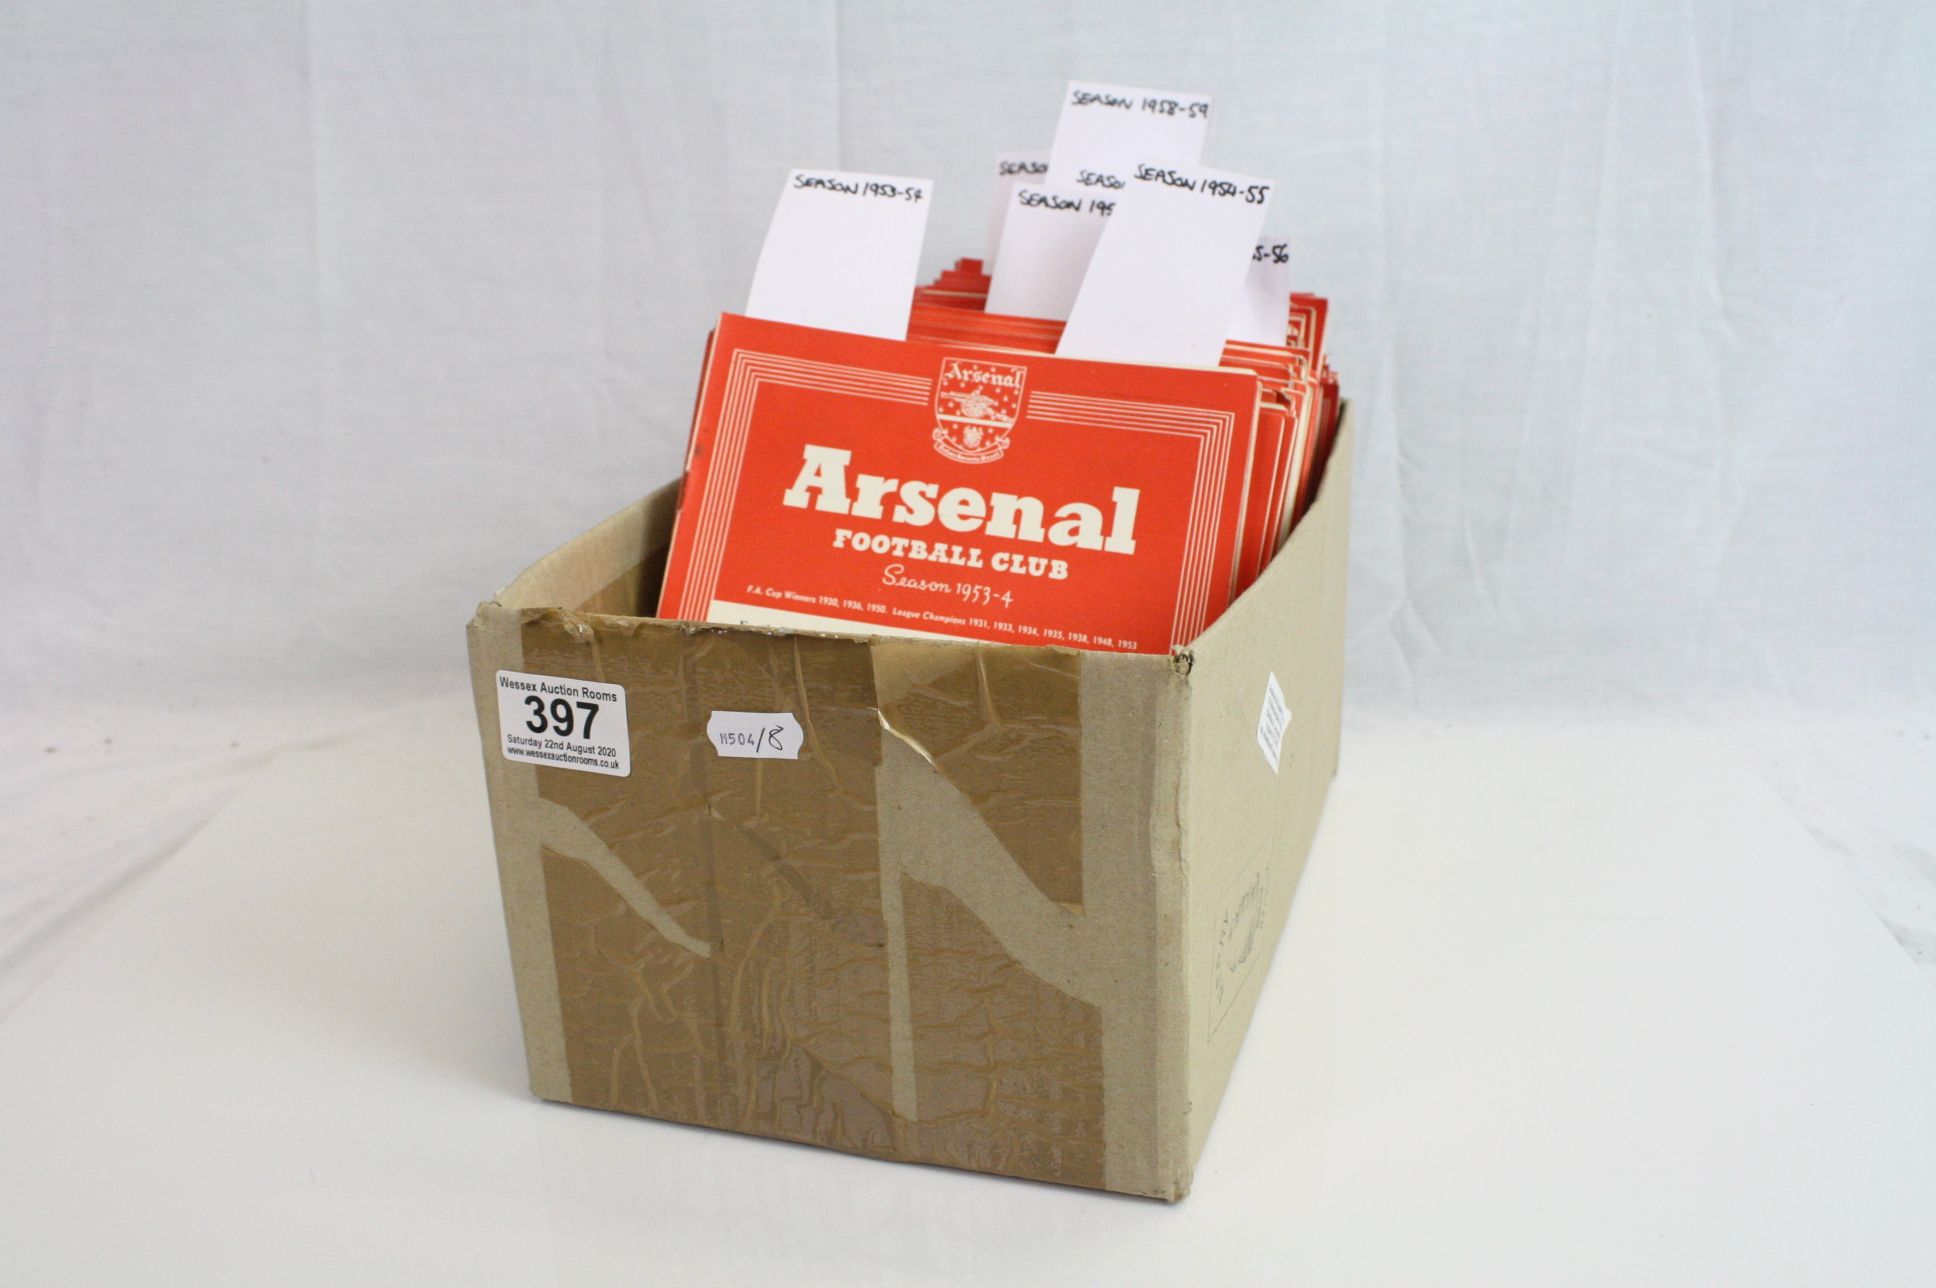 Football programmes - Large collection of approx 150 Arsenal home programmes ranging from the 1953/4